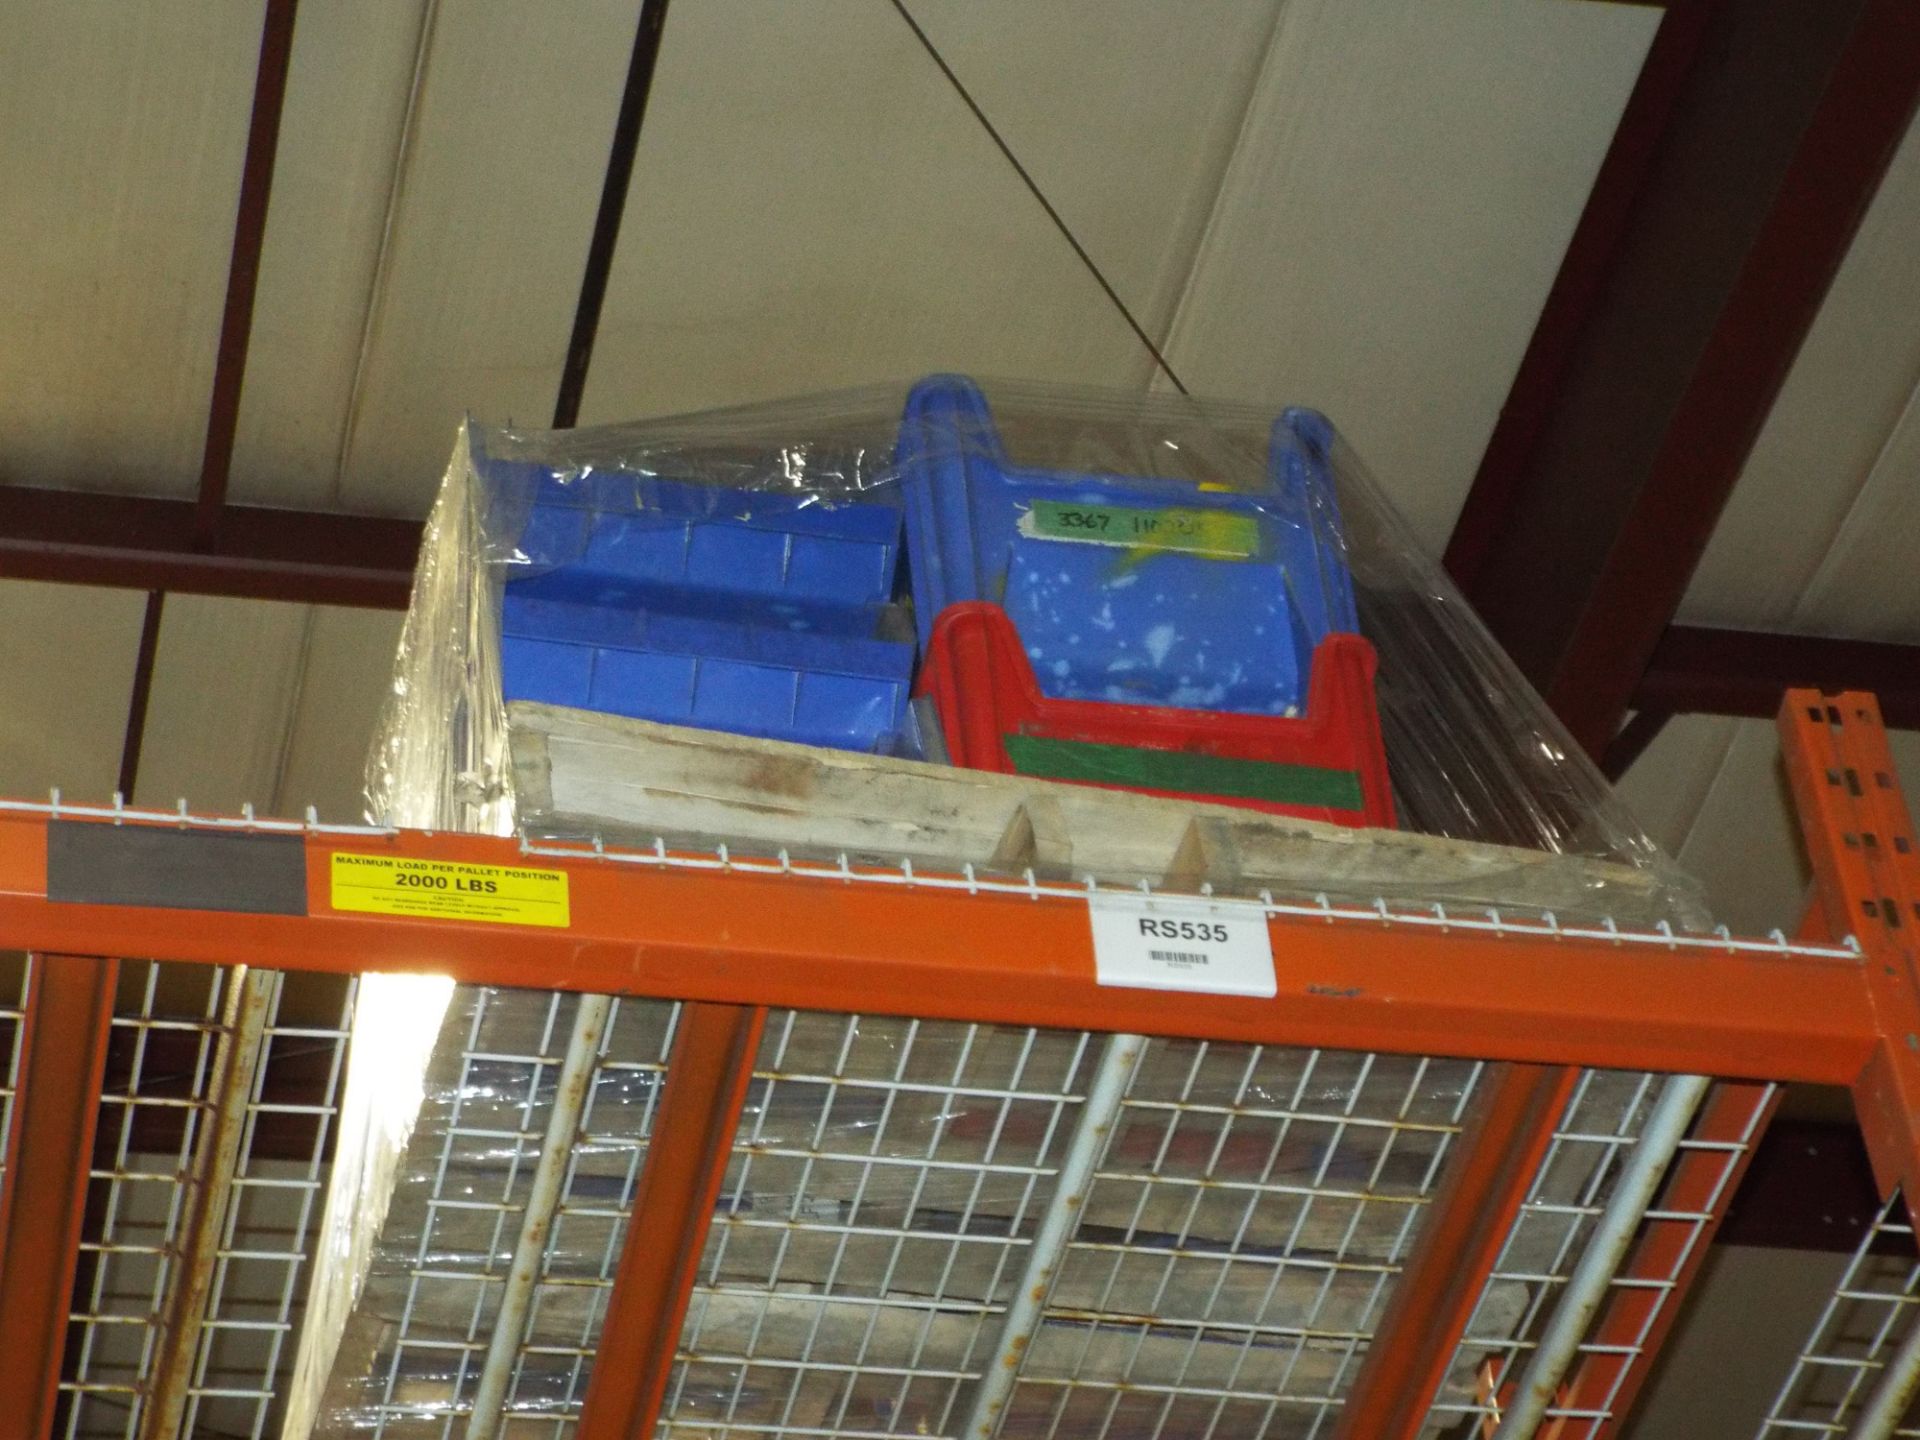 LOT/ CONTENTS OF RACK INCLUDING SHIPPING SUPPLIES AND PIPE FITTING HARDWARE - Image 4 of 4